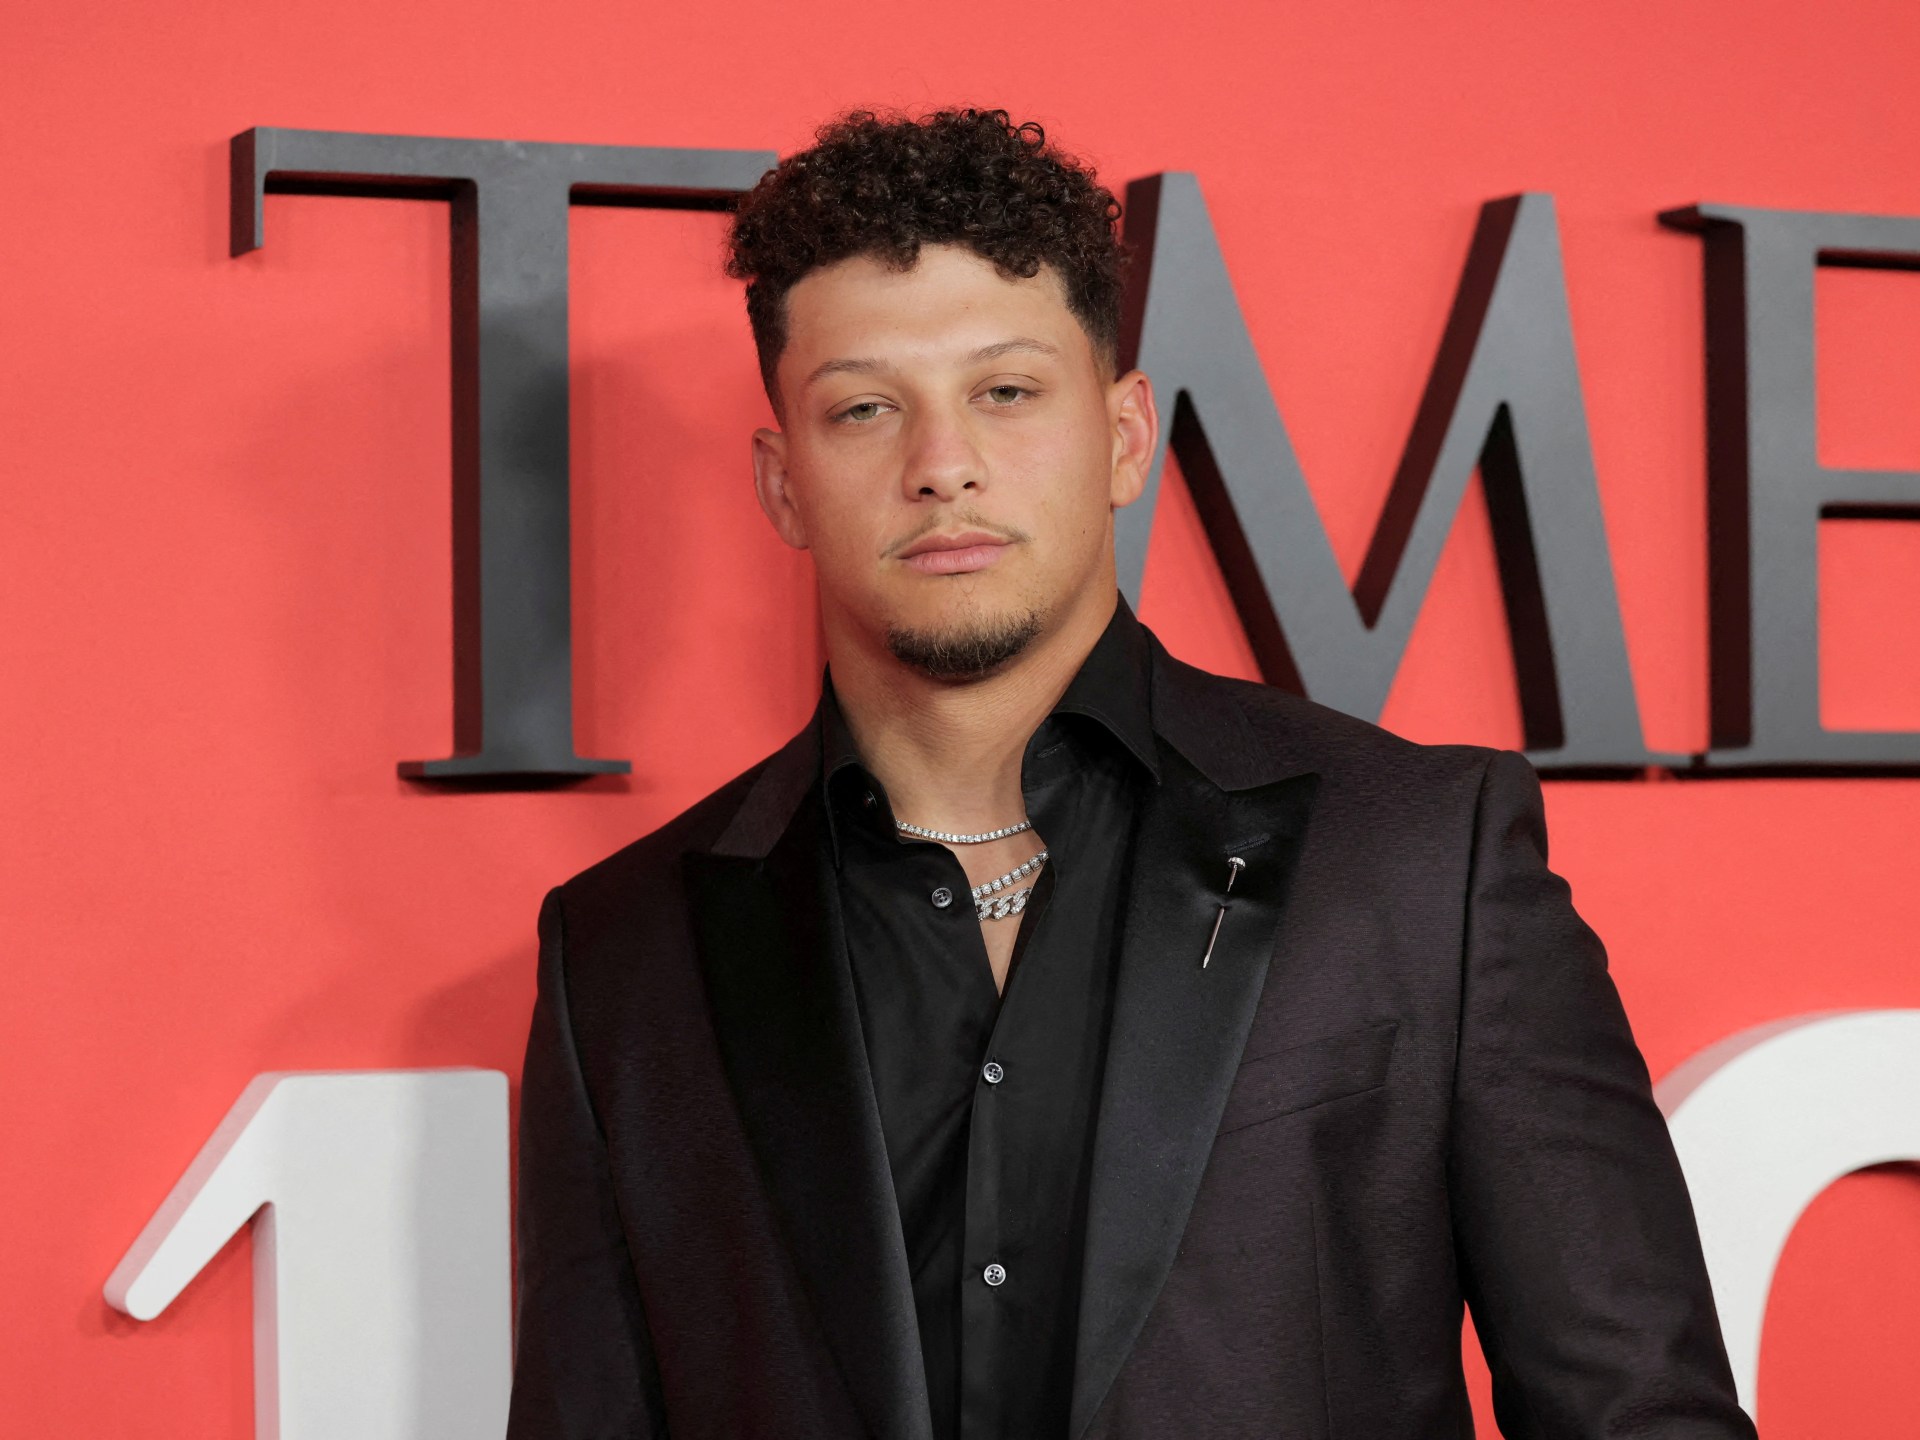 Patrick Mahomes skips NFL Draft as Kansas City Chiefs star and wife Brittany stun on red carpet at Time 100 gala | The US Sun